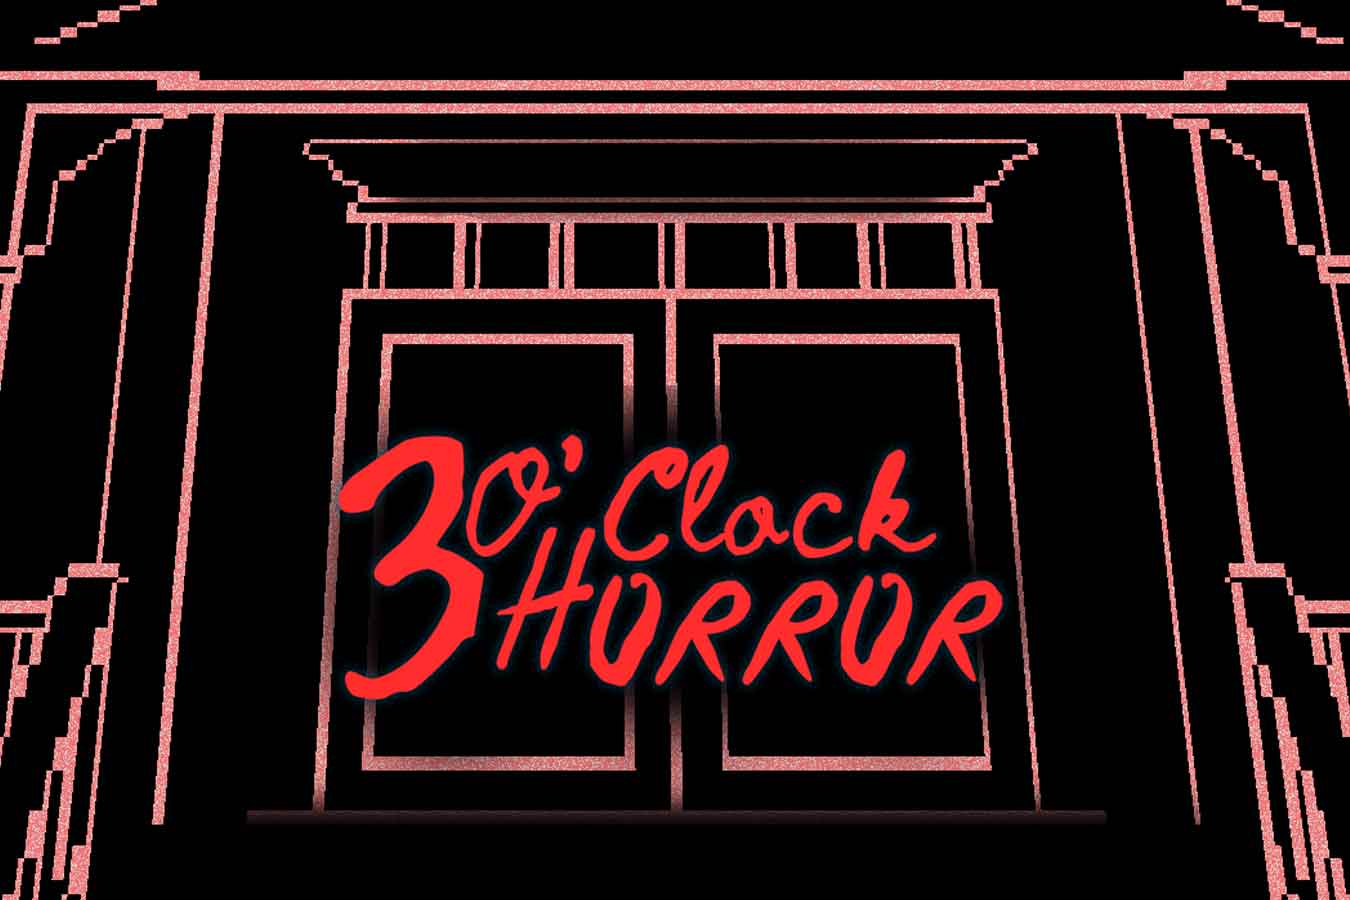 Mi Scusi and 3 O clock Horror are available for download and play.